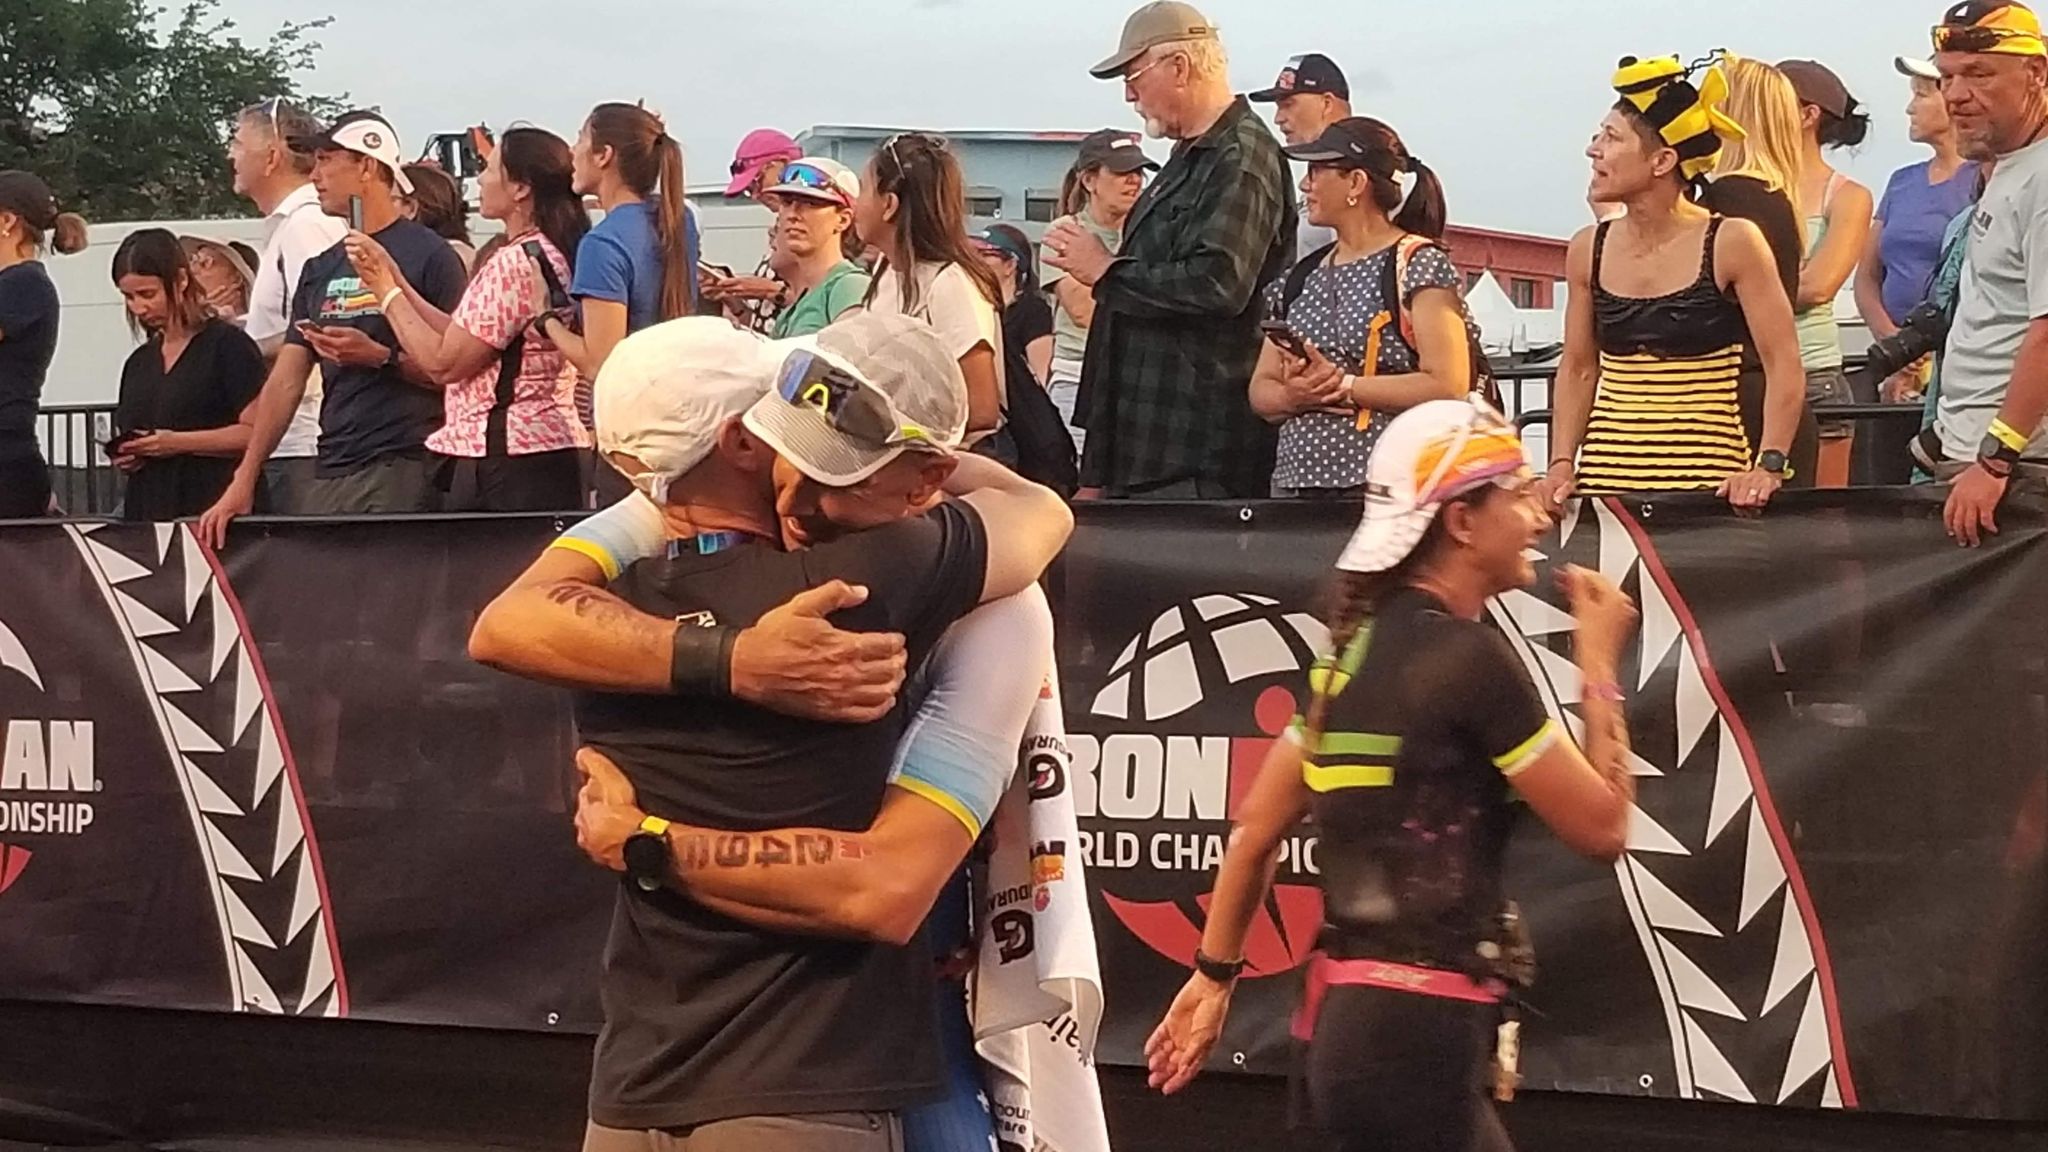 Ironman World Championship | ALS News Today | Kyle Brown and Patrick Harfield embrace at the end of the Ironman competition